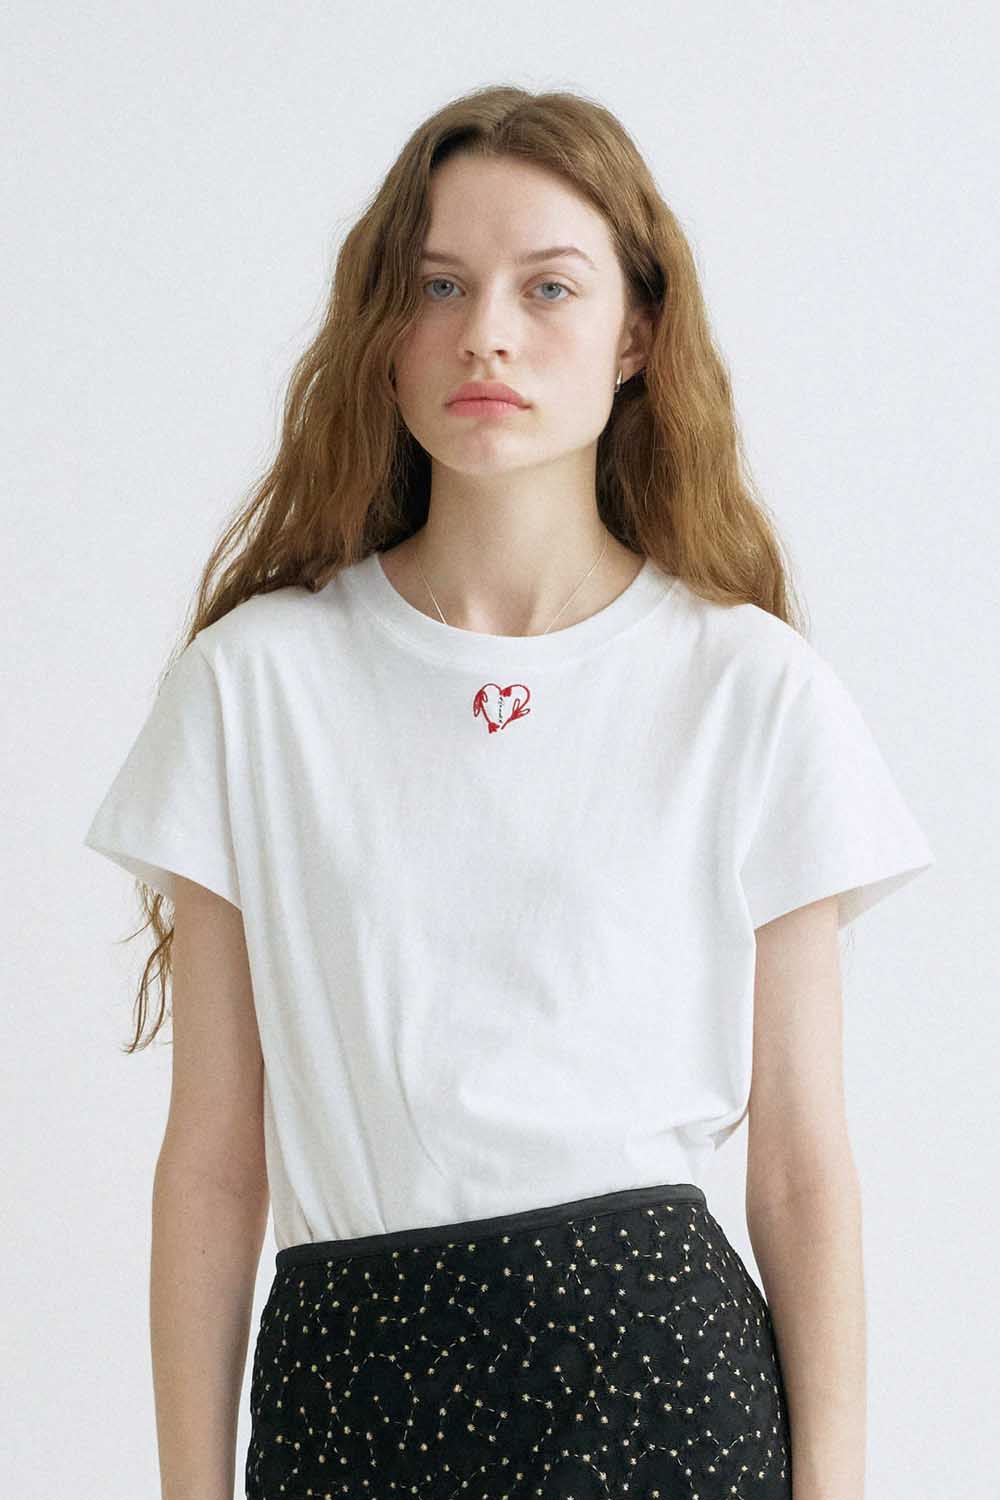 S Heart Embroidery Tshirt_White